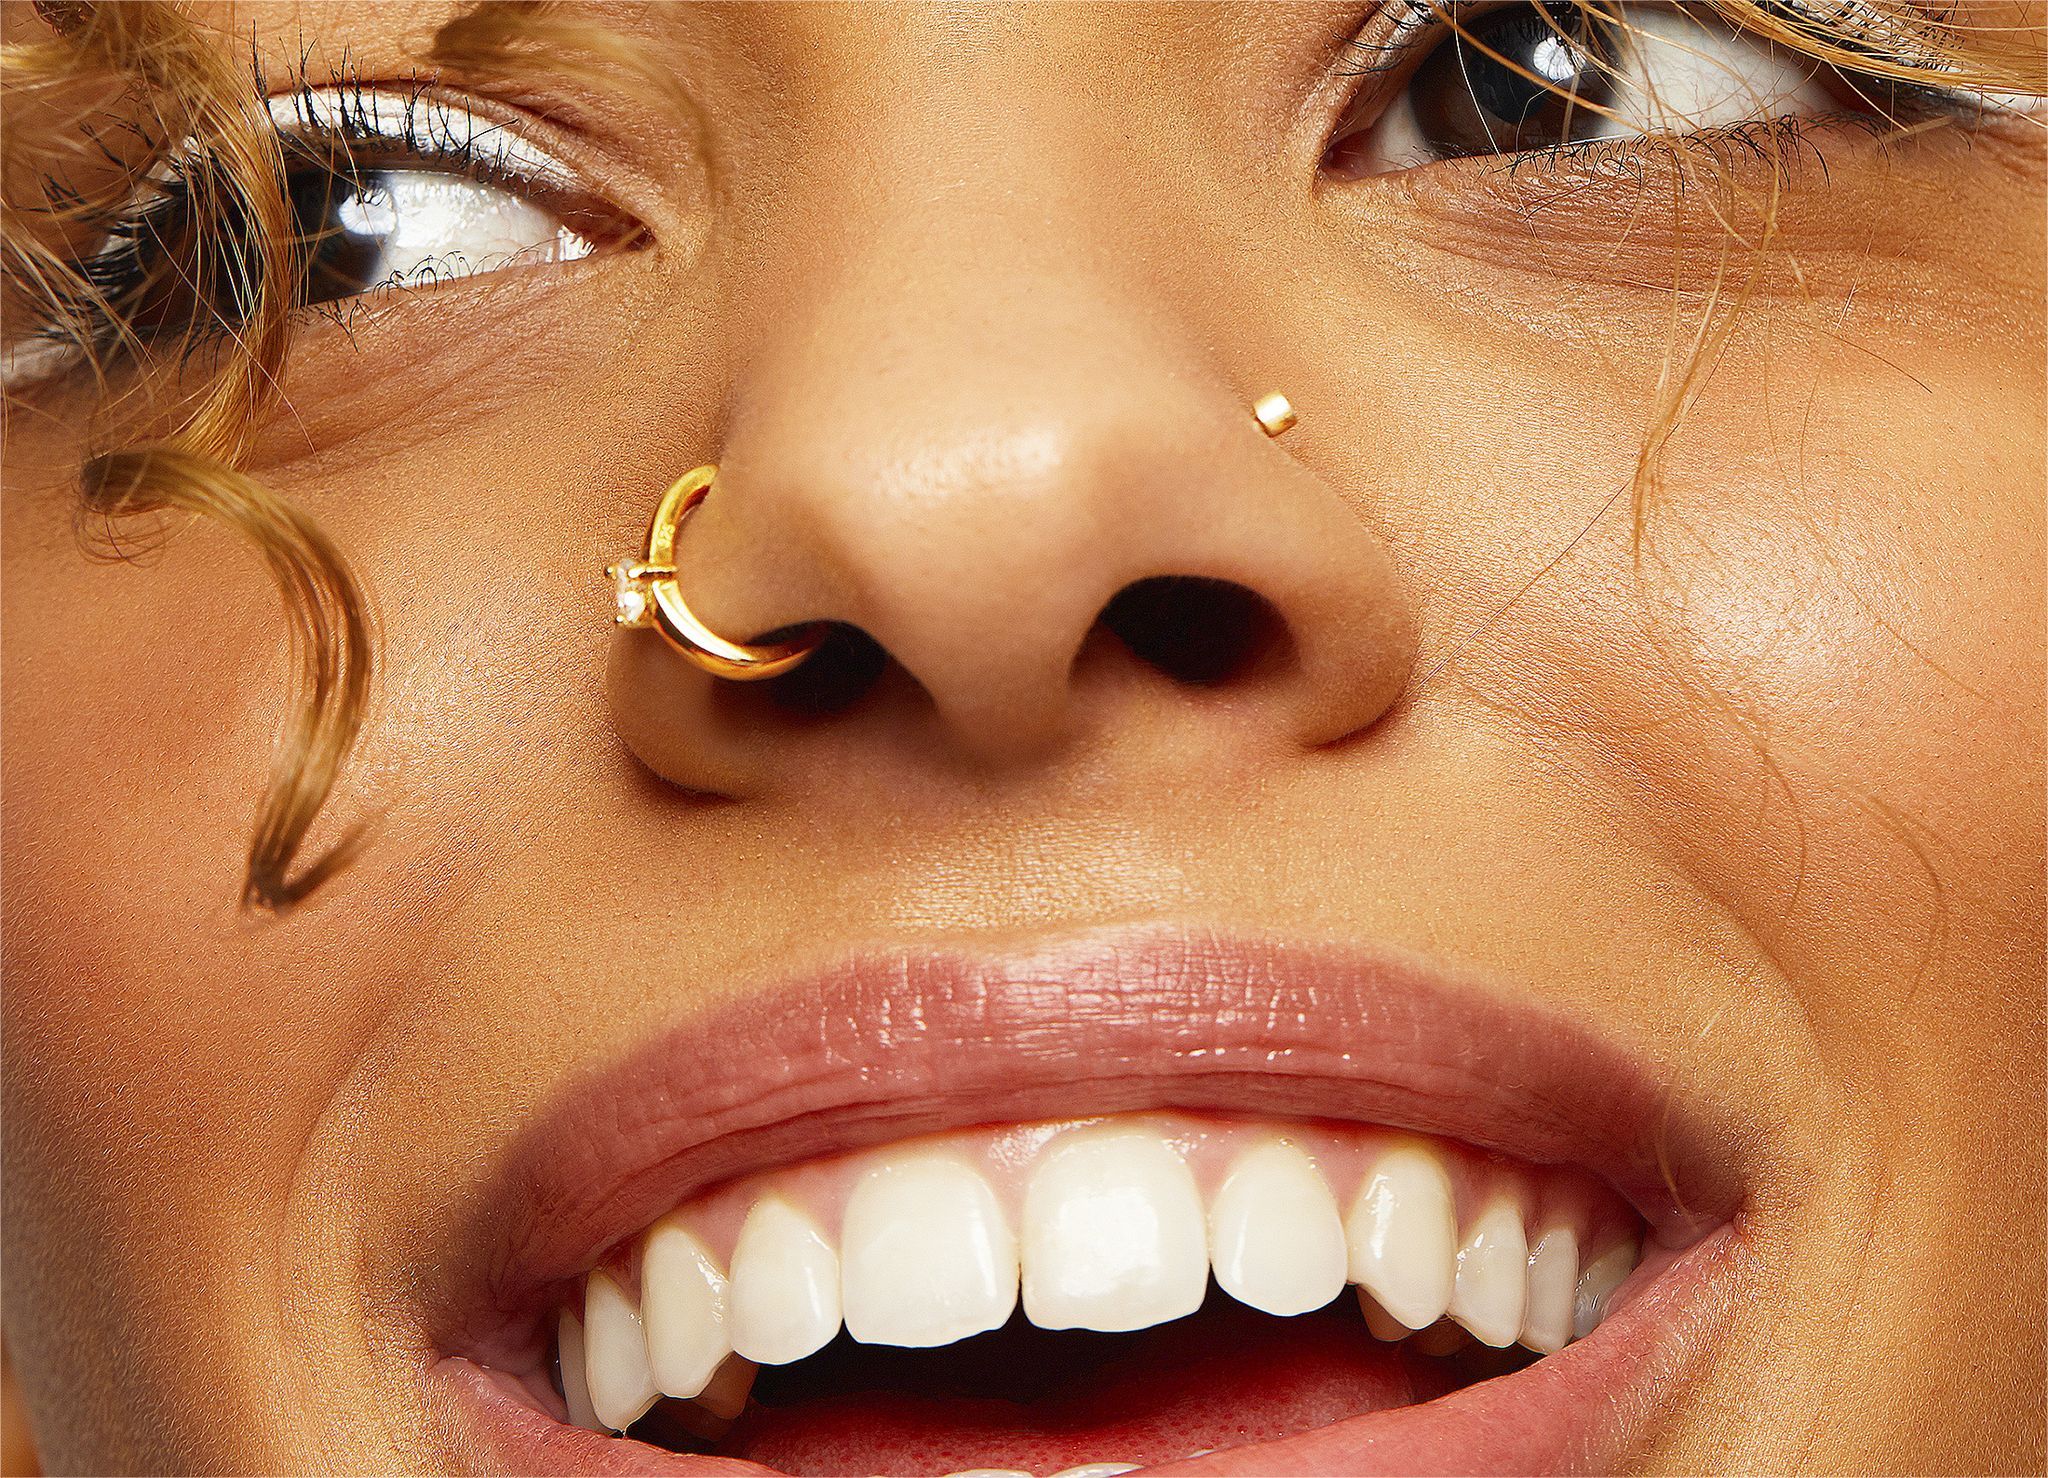 The Ear and Nose Piercing Trend of 2020 